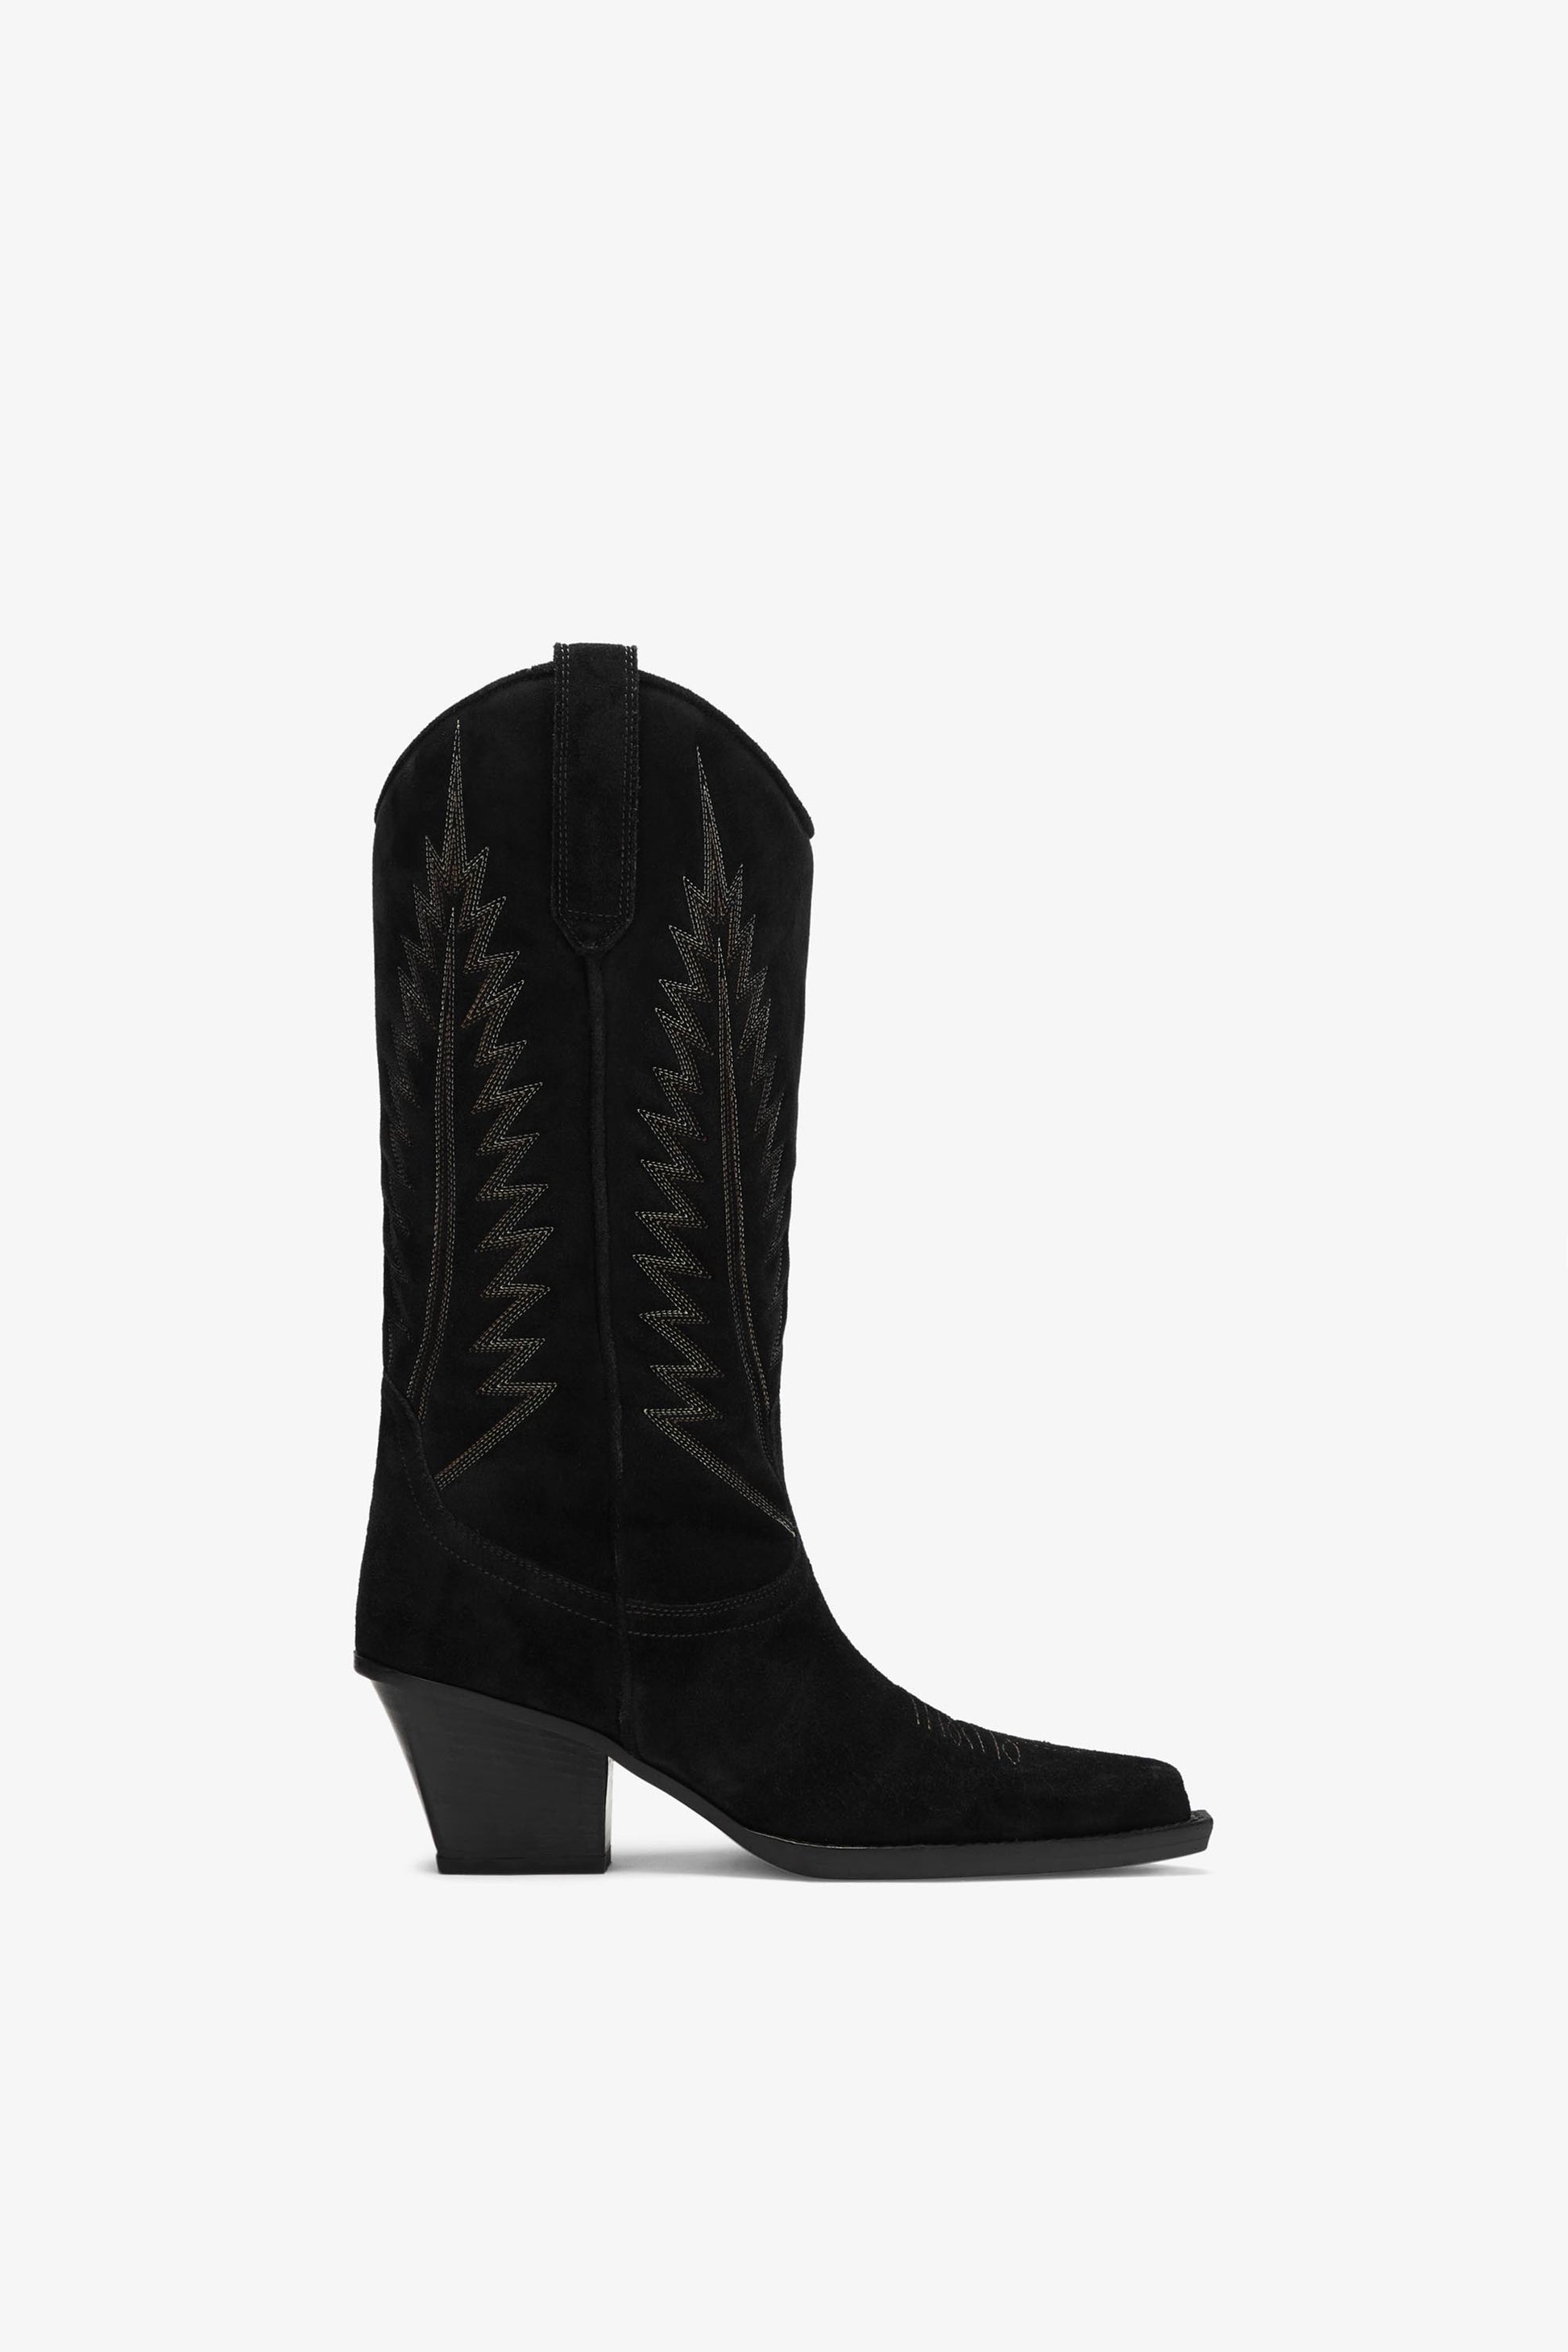 Black suede boot